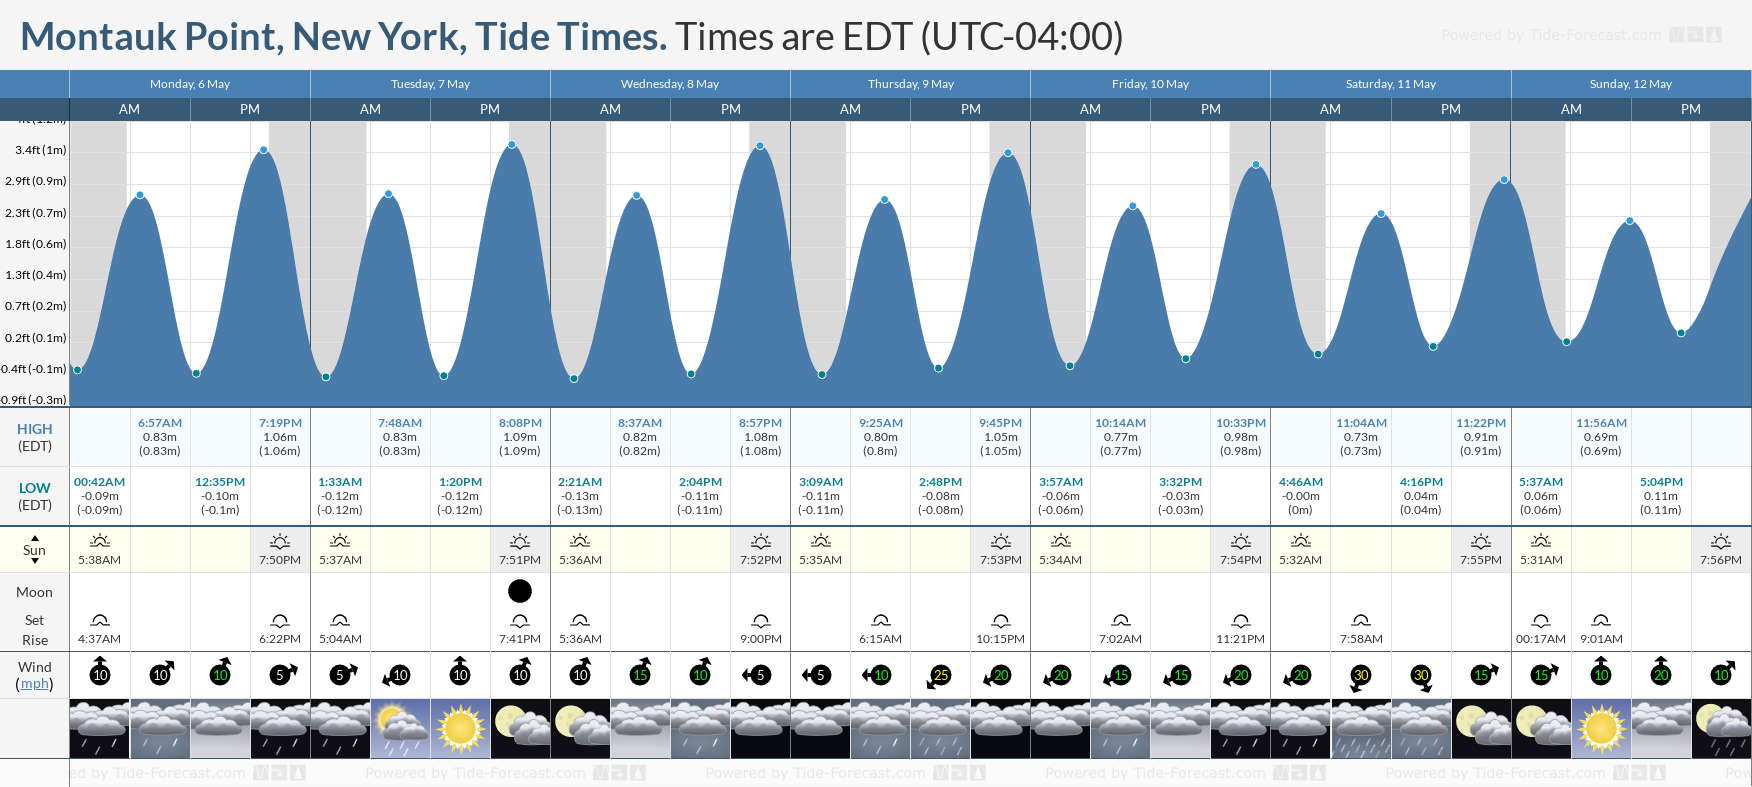 Montauk Point, New York Tide Chart including high and low tide times for the next 7 days